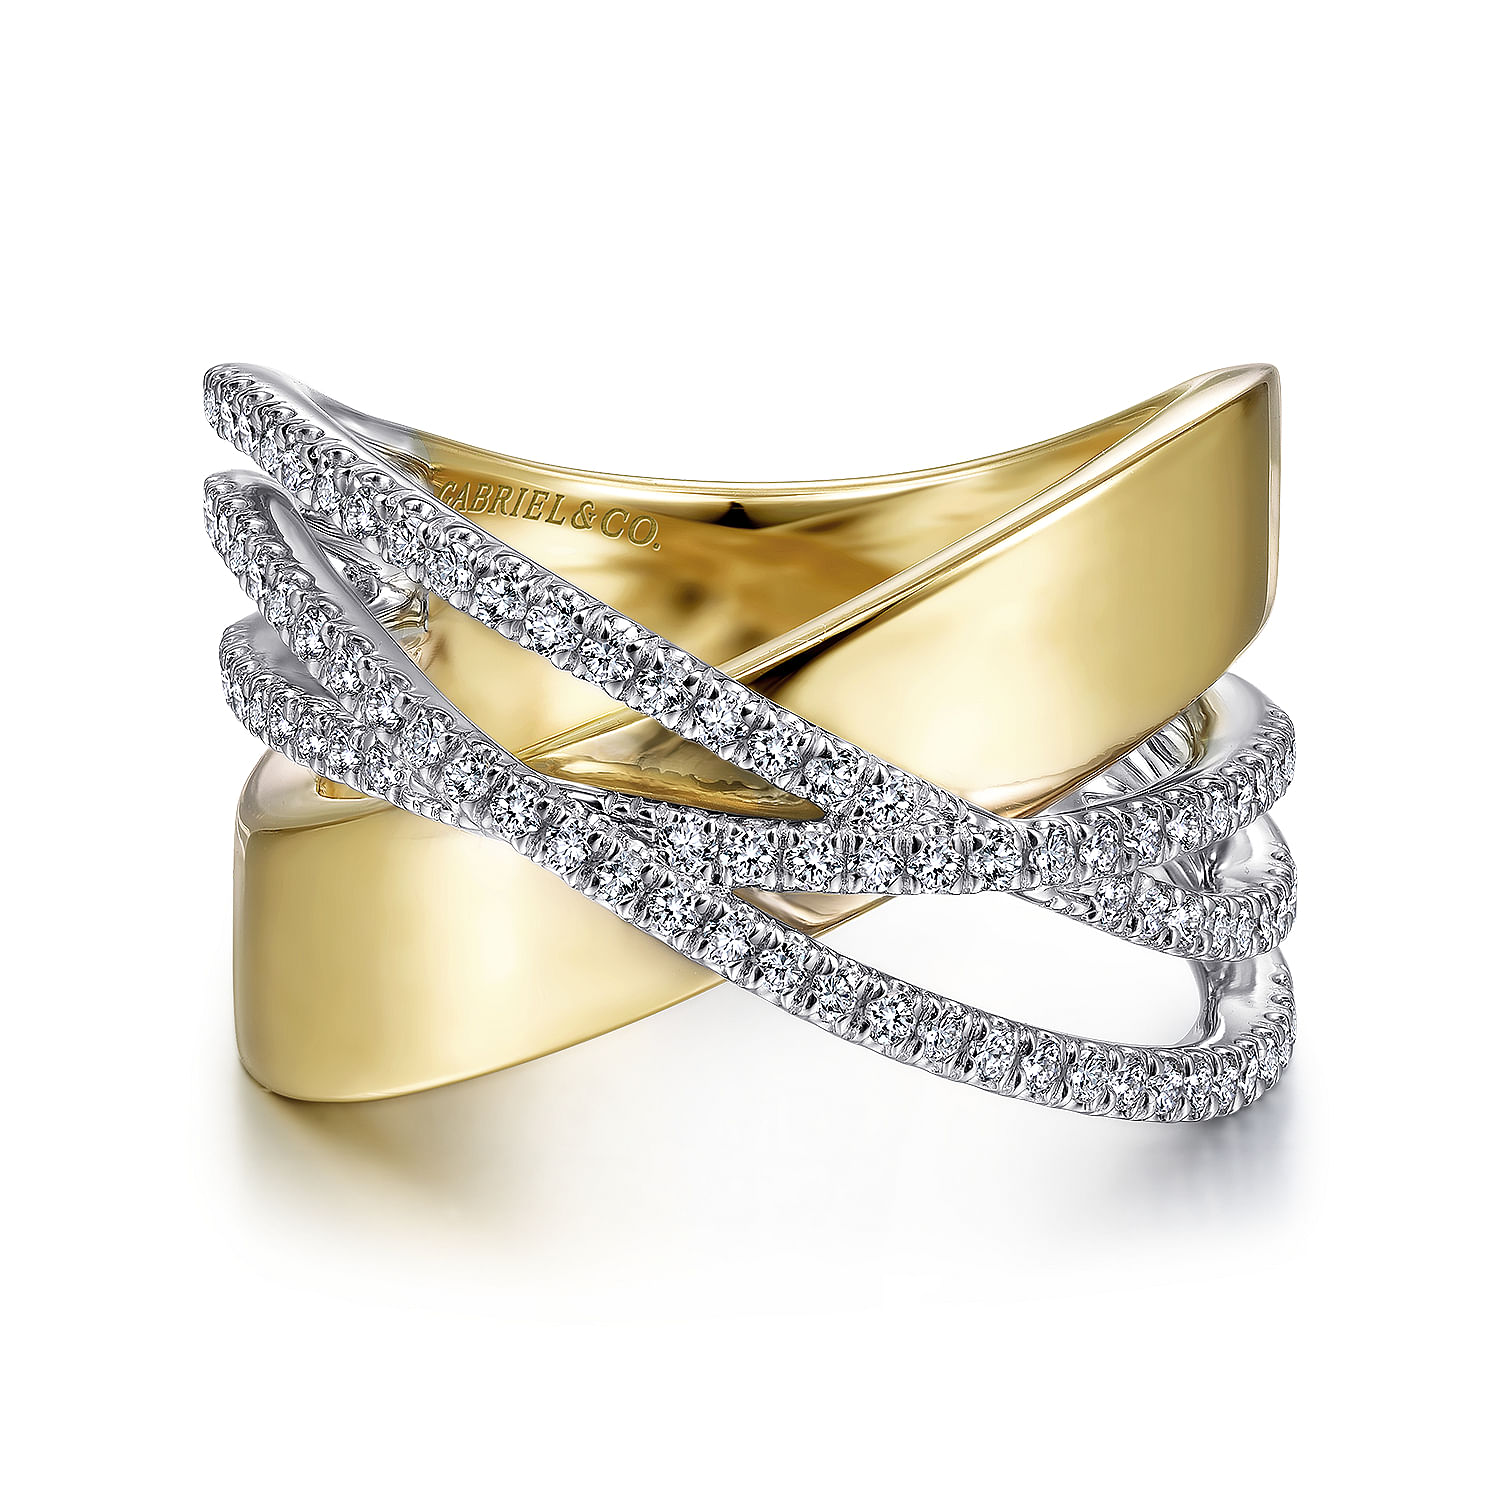 14K White-Yellow Gold Polished and Diamond Bands Criss Cross Ring